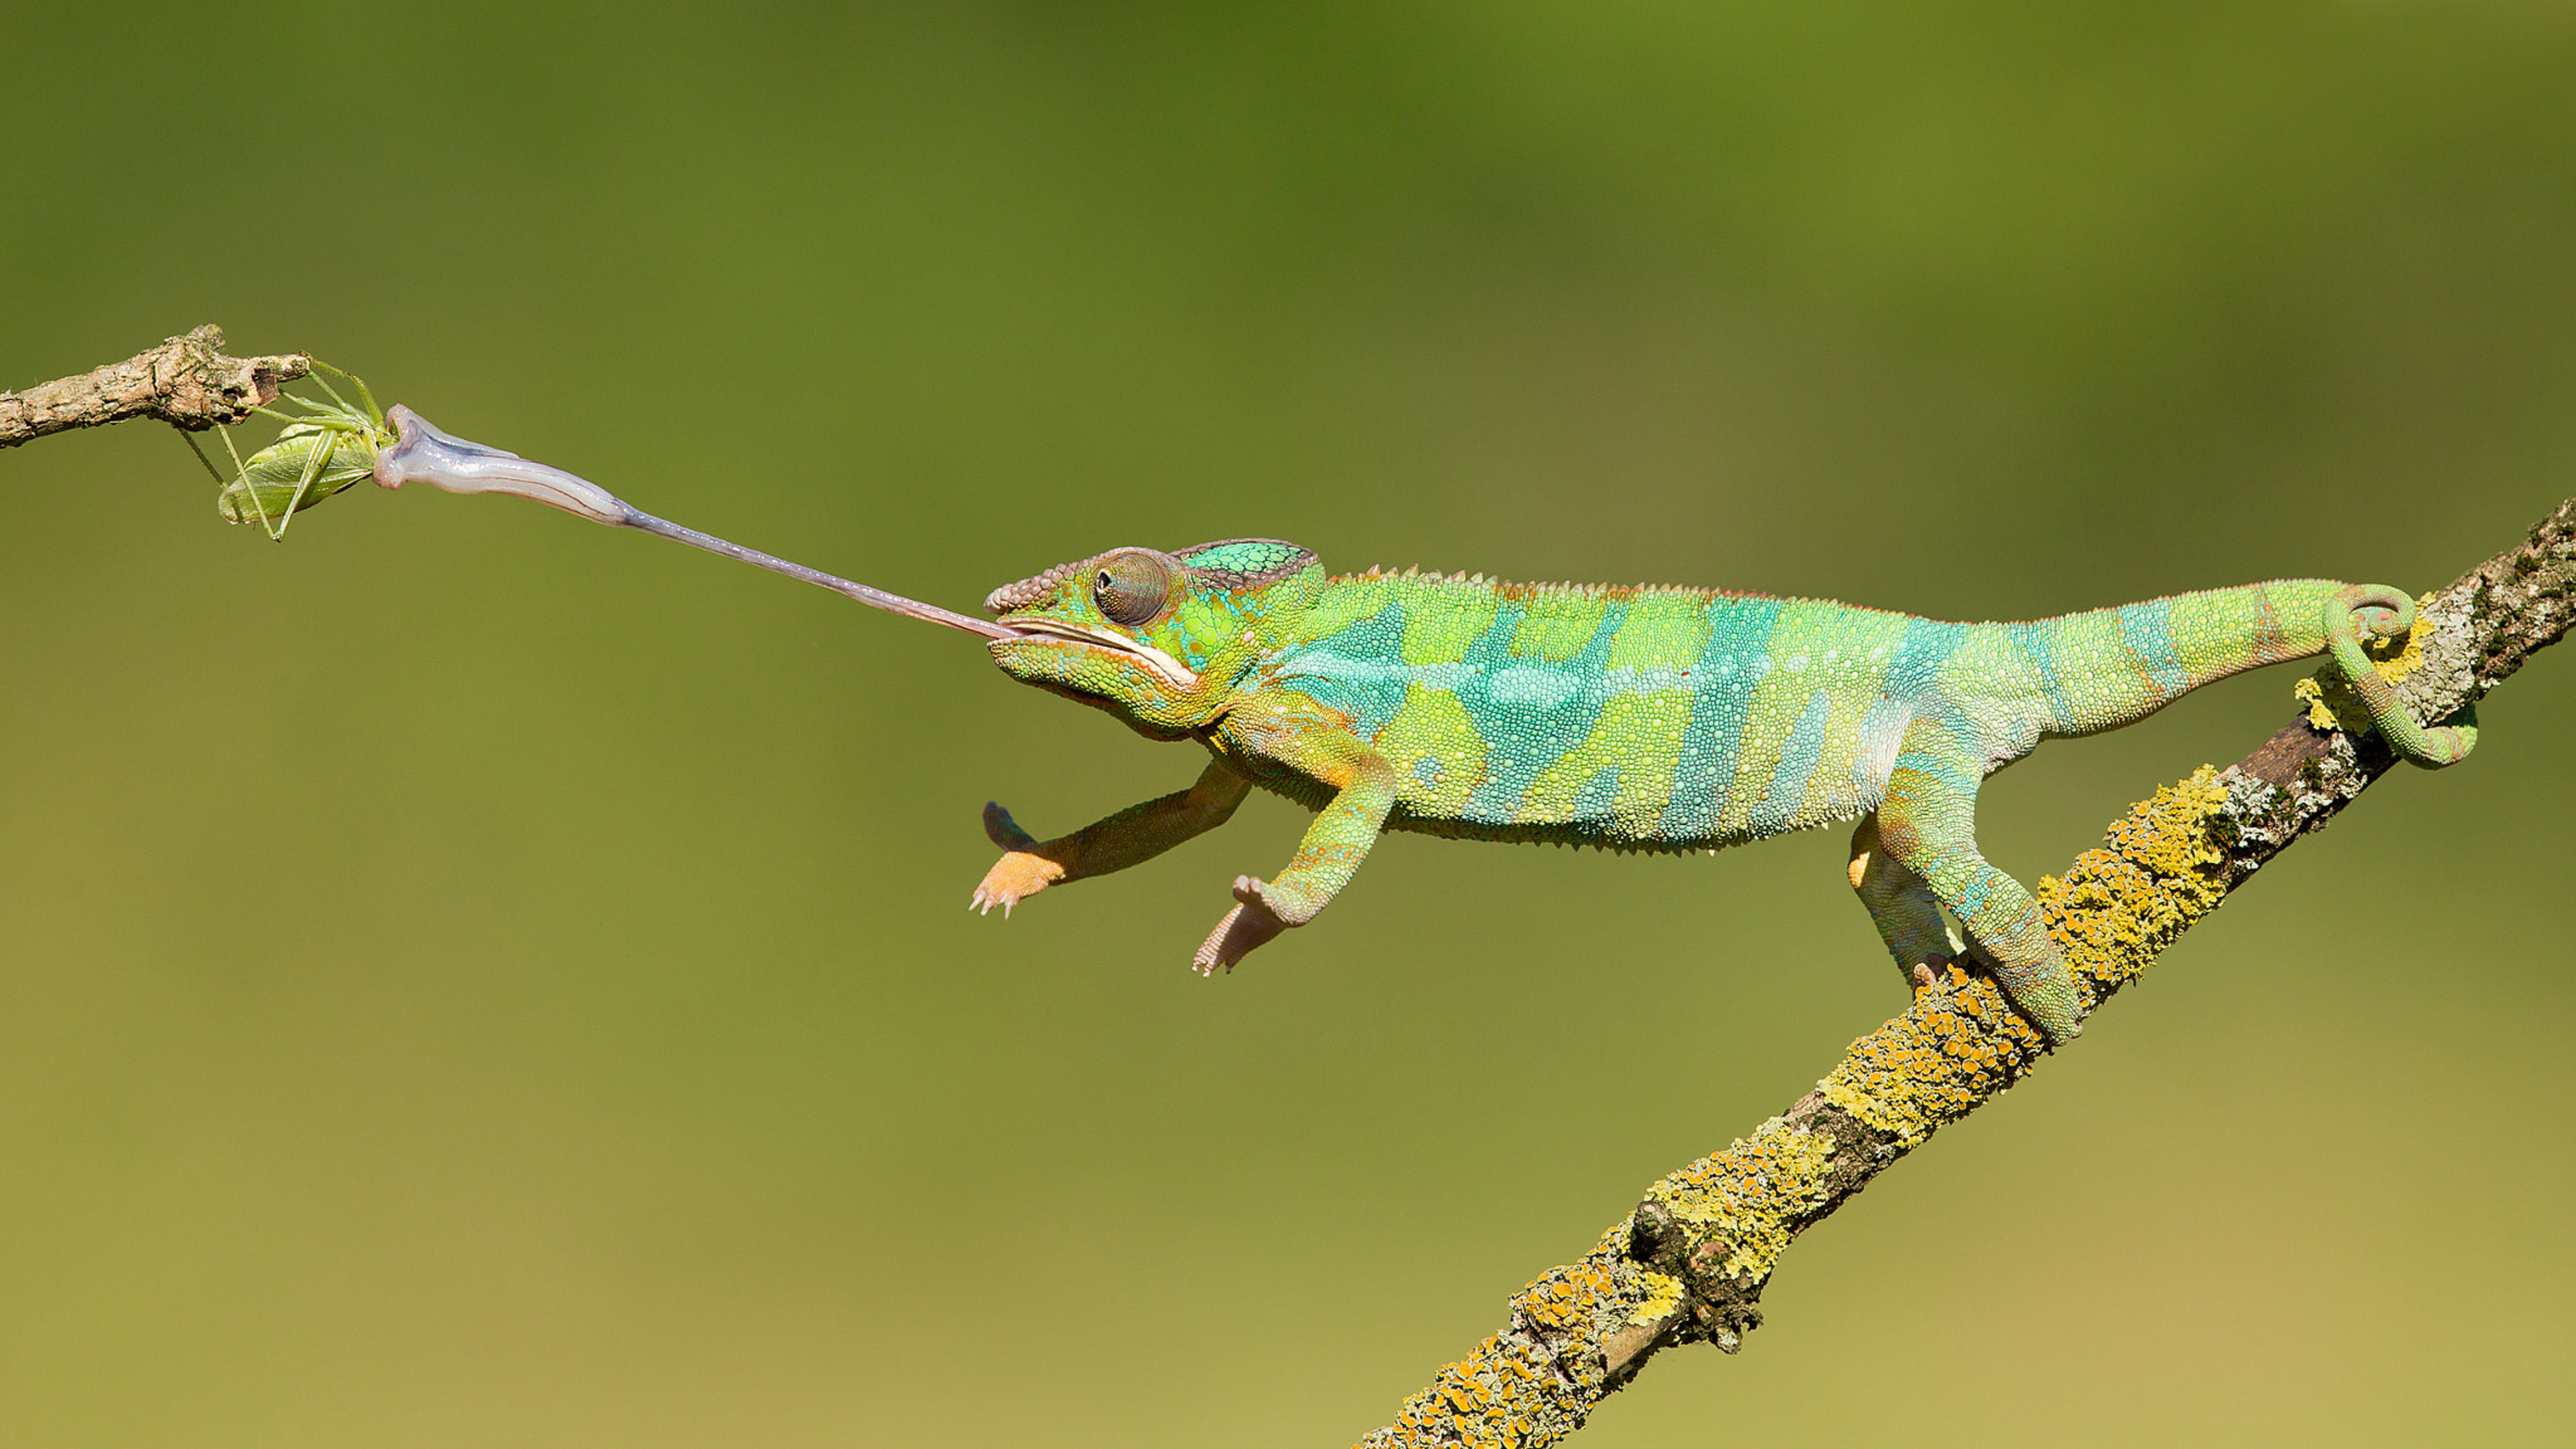 Chameleon Hunting On Insects Animals With Long Tongues Changing Color